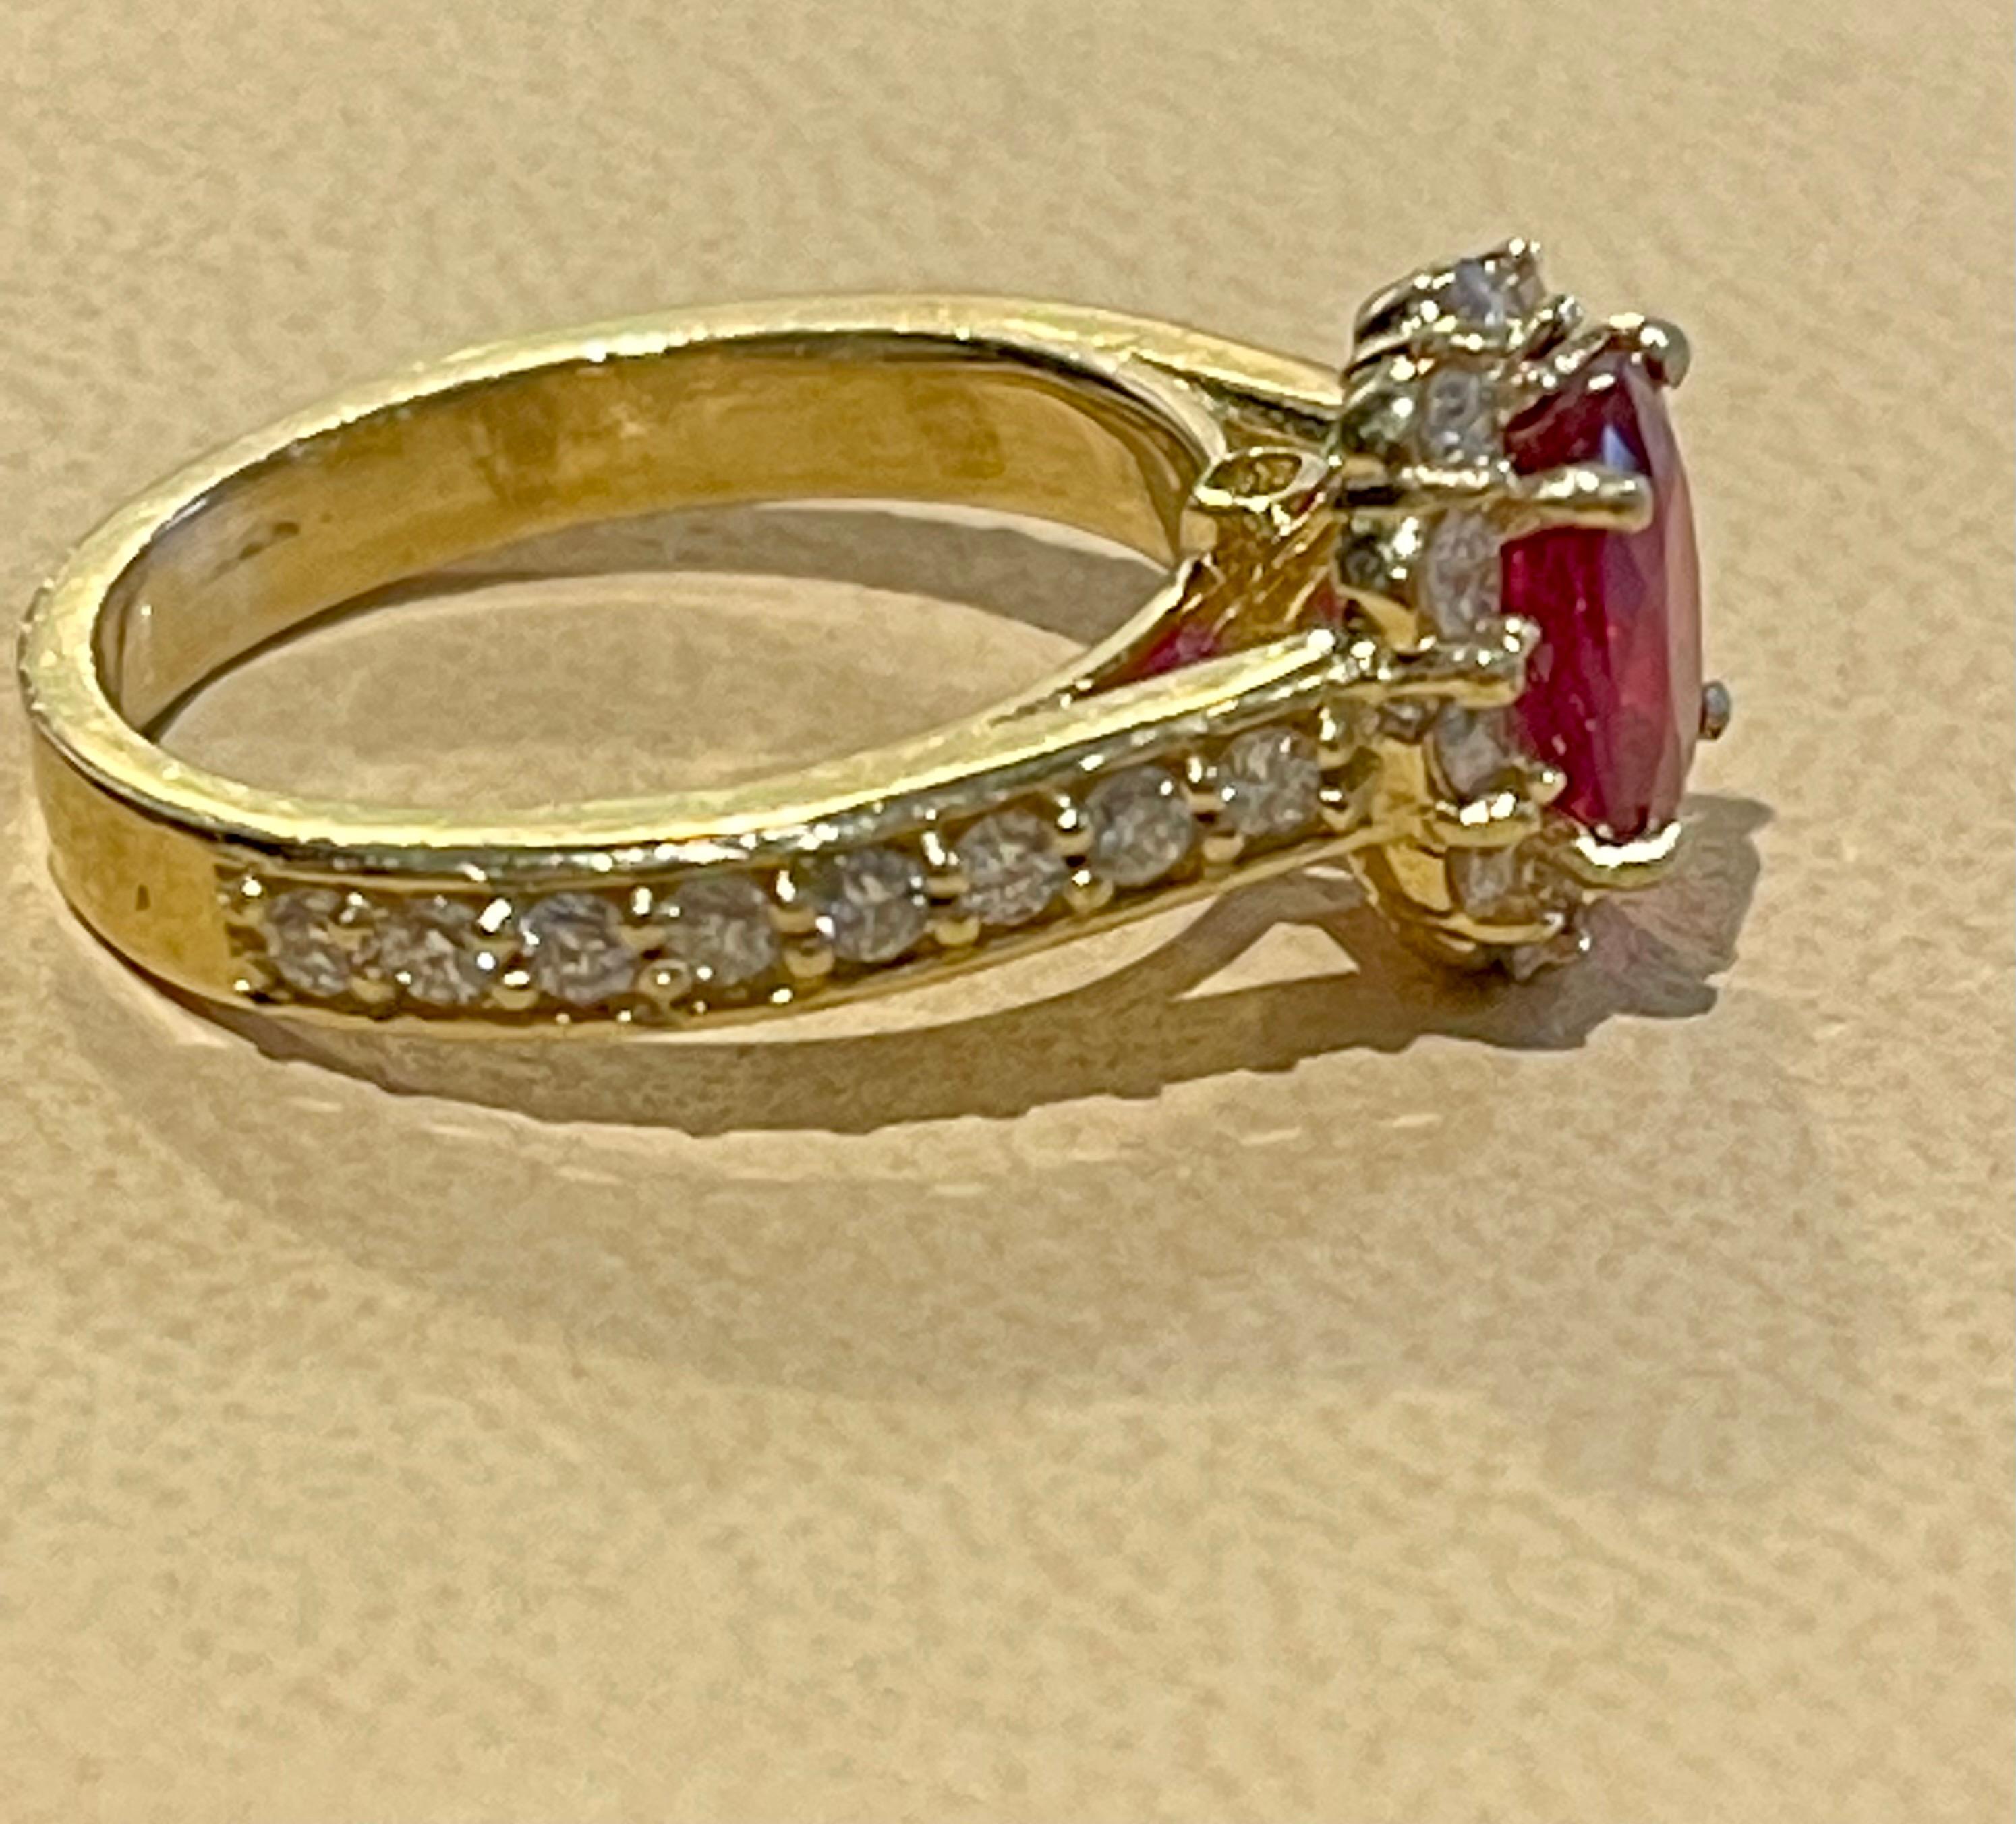 Oval 1.5 Carat Treated Ruby and 1.20 Carat Diamond 14 Karat Yellow Gold Ring For Sale 11